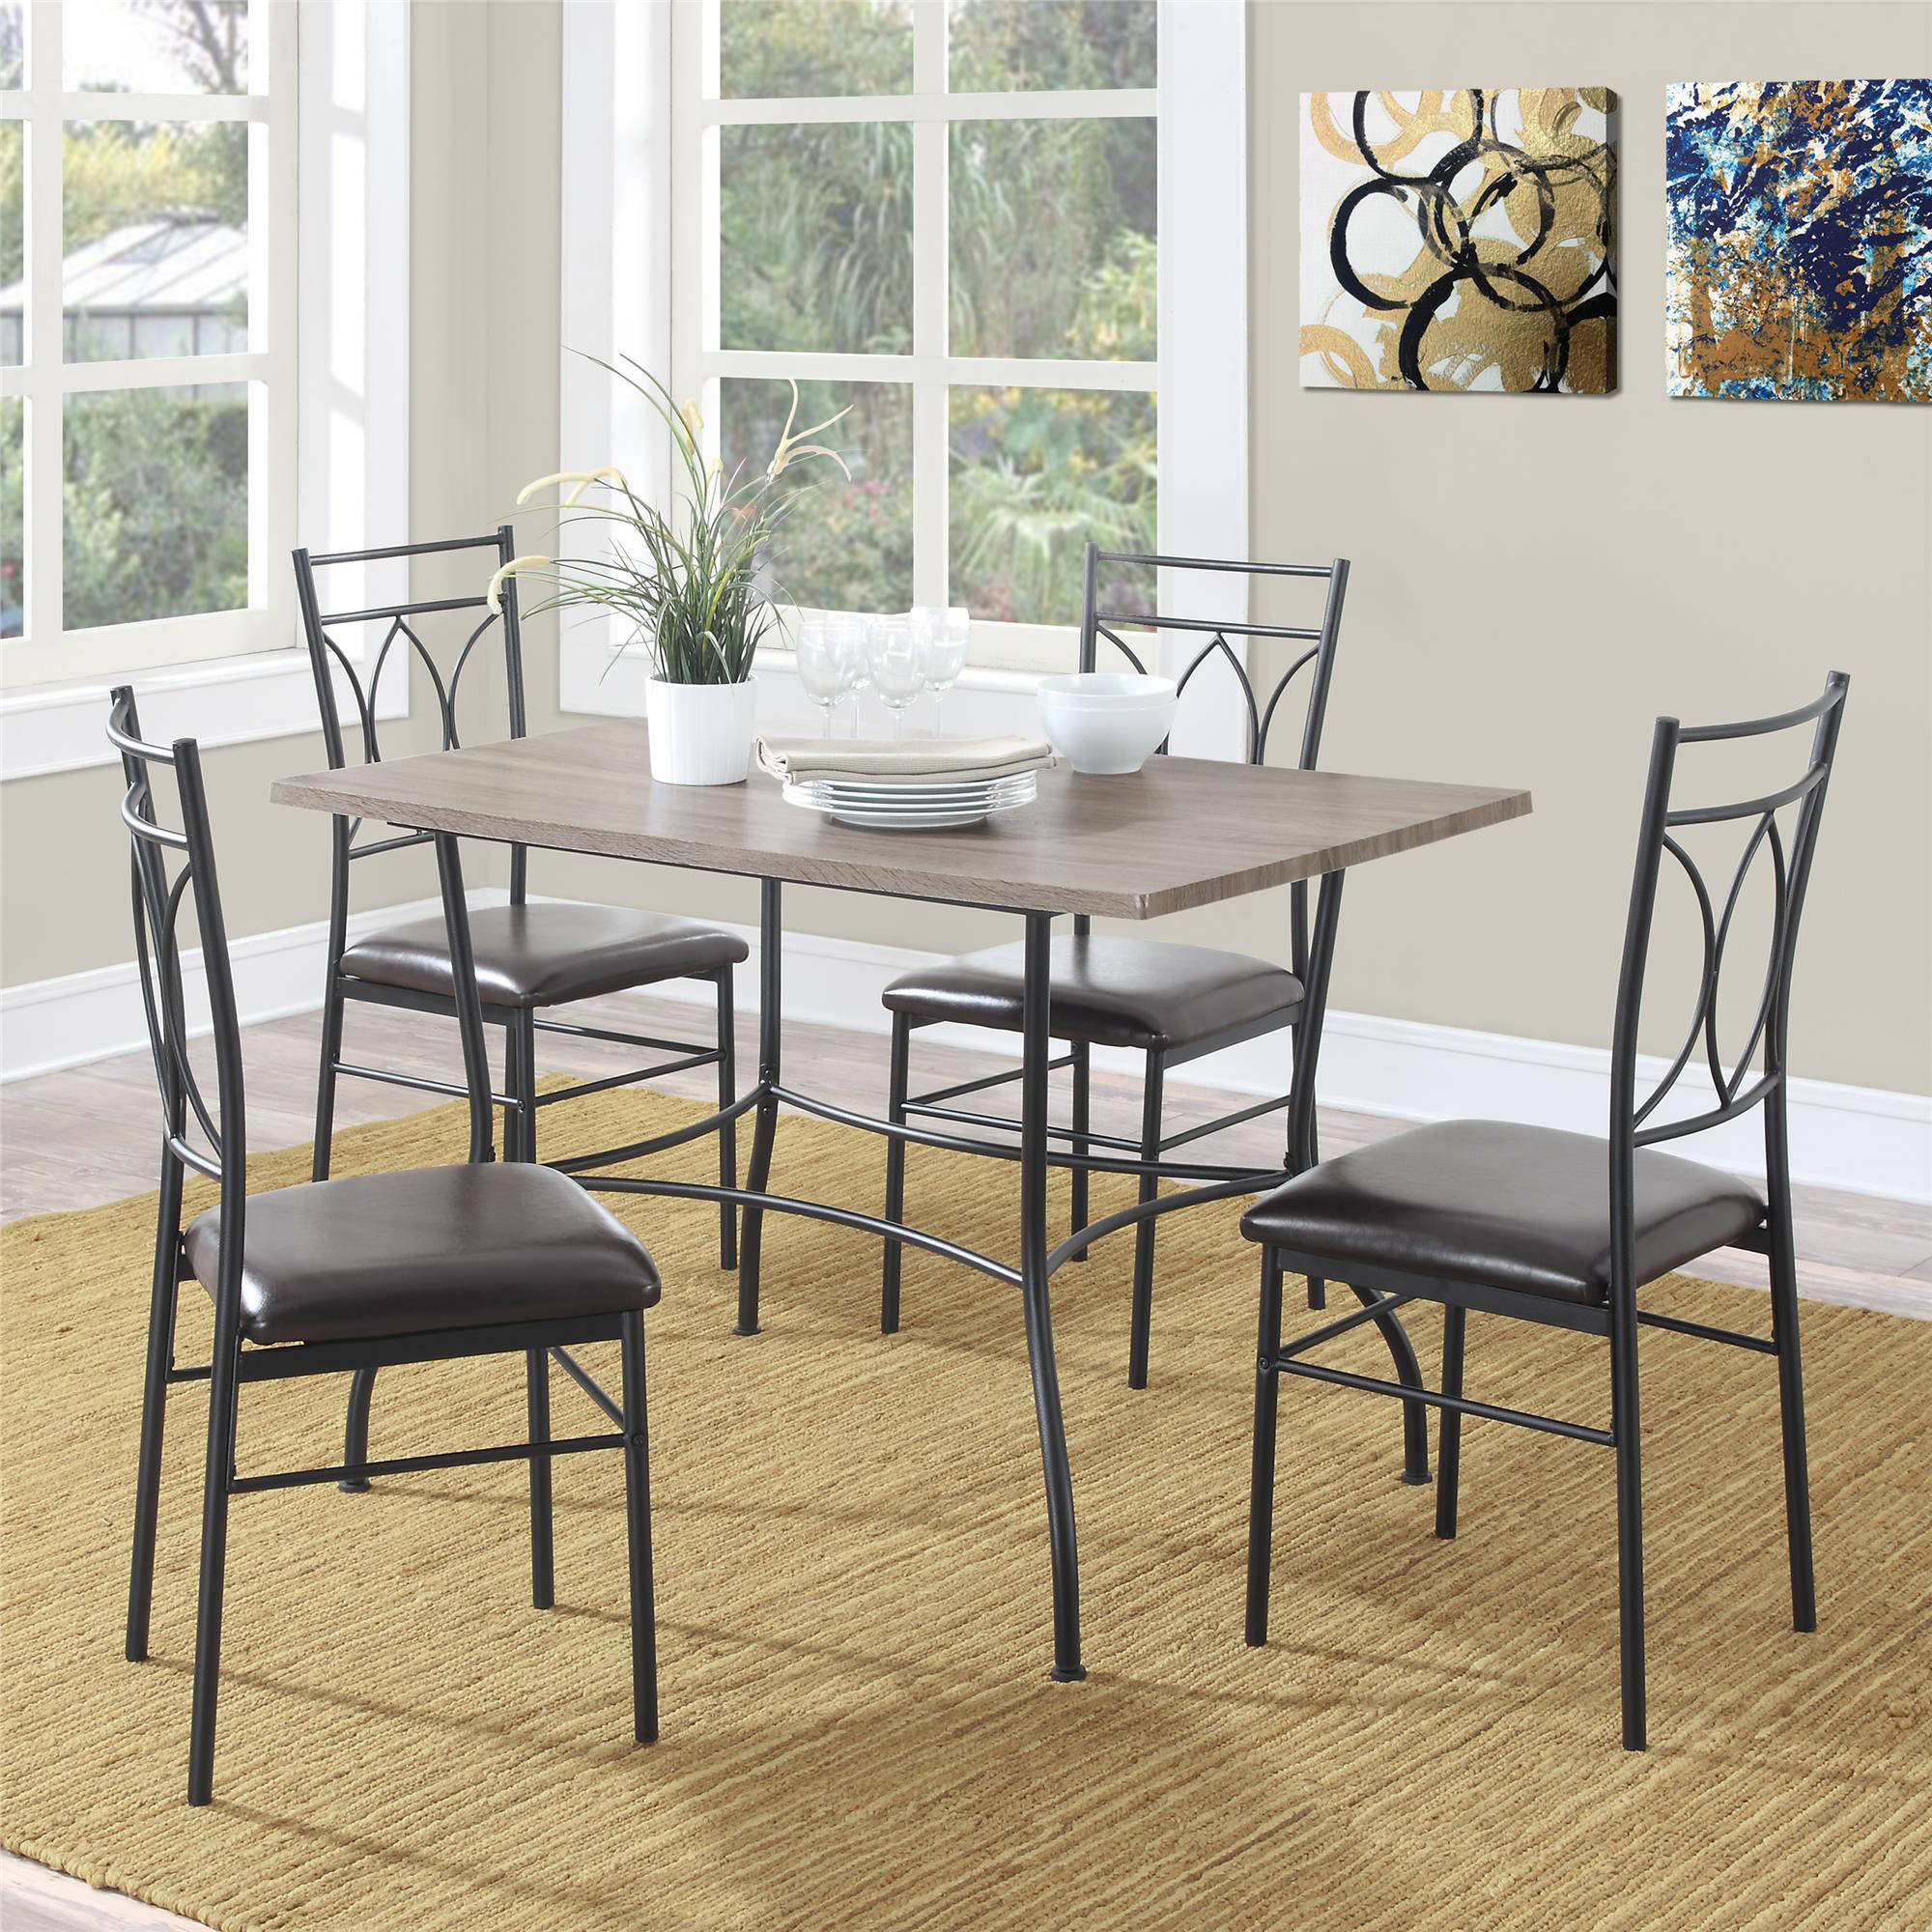 Dining Room Magnificent Sturyd Walmart Dining Set With within dimensions 2000 X 2000